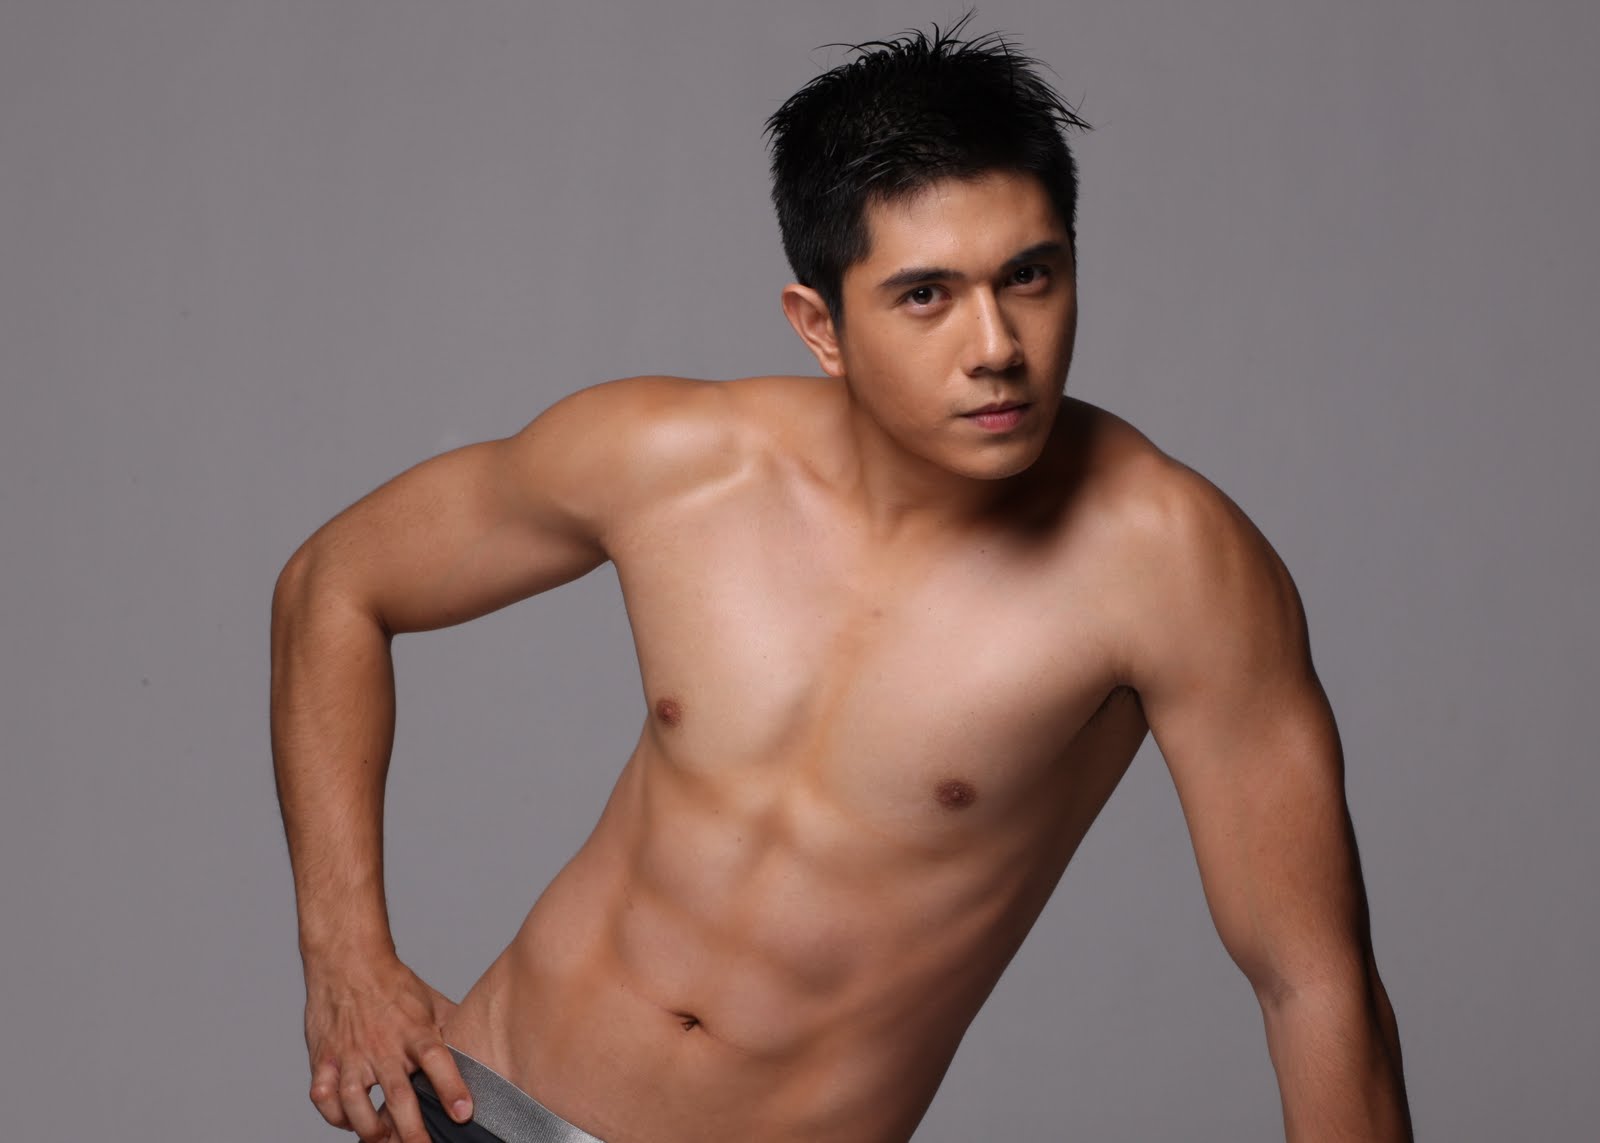 Paolo bediones filipino television host part